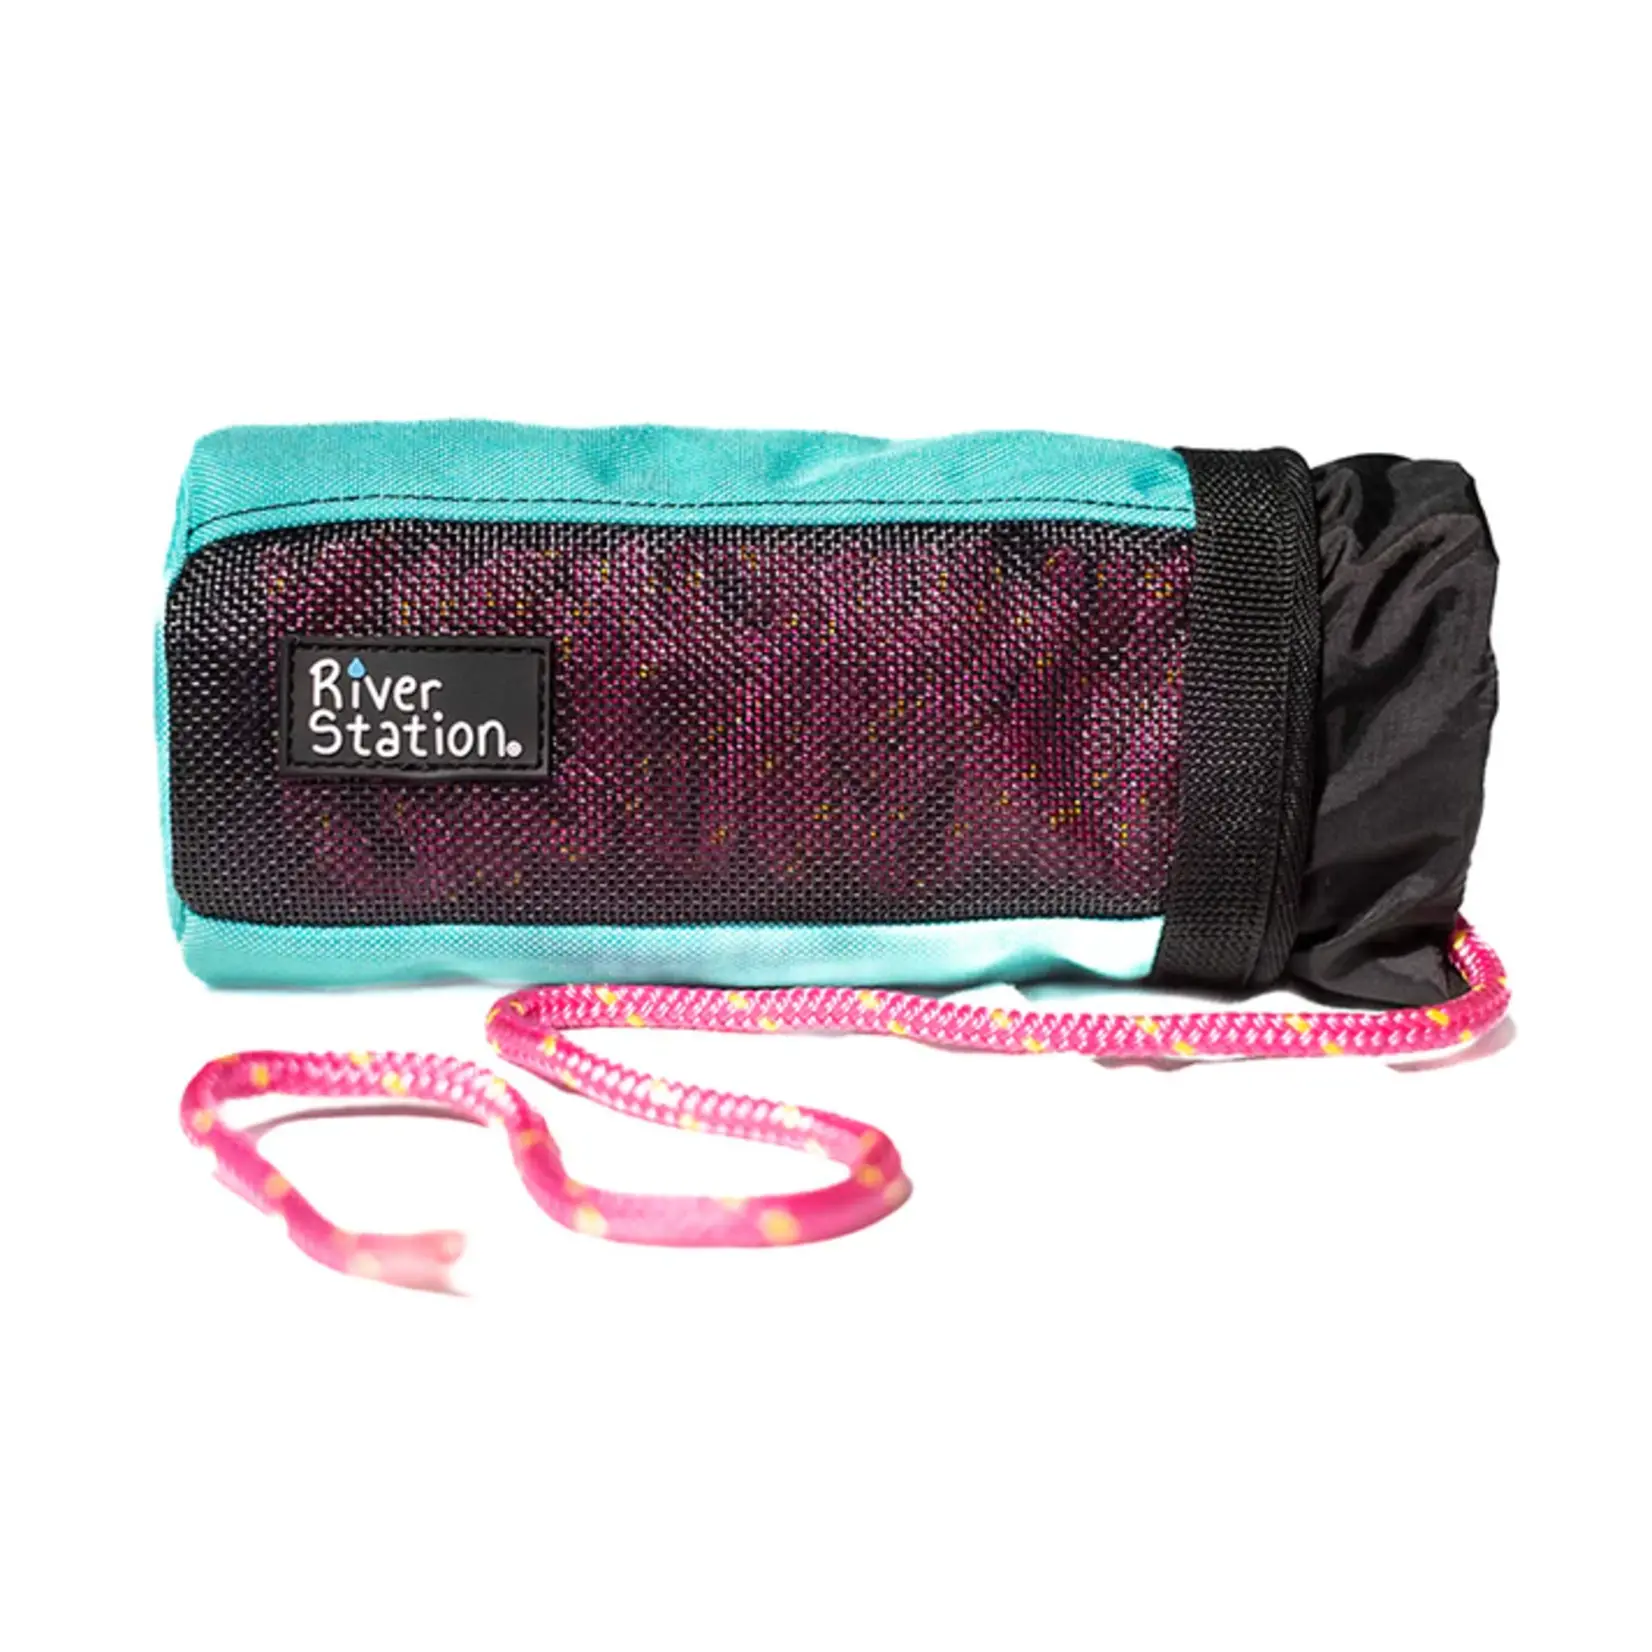 River Station Gear River Station Gear Rapid Pack - Quick Release Waist Throw Bag